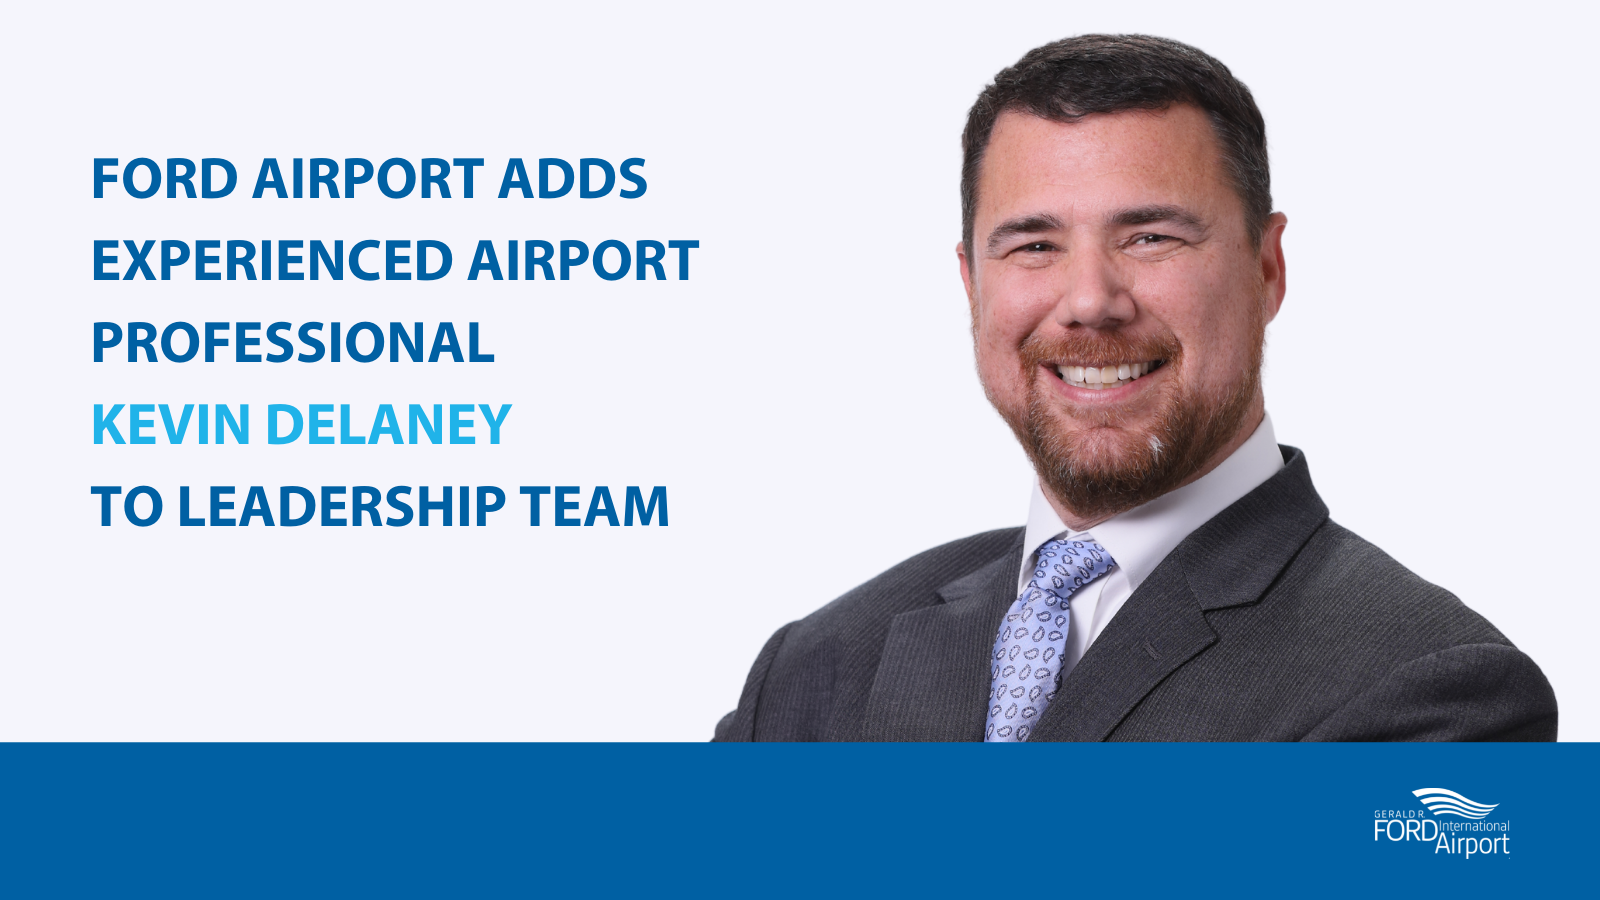 Ford Airport Adds Experienced Airport Professional Kevin Delaney to Leadership Team